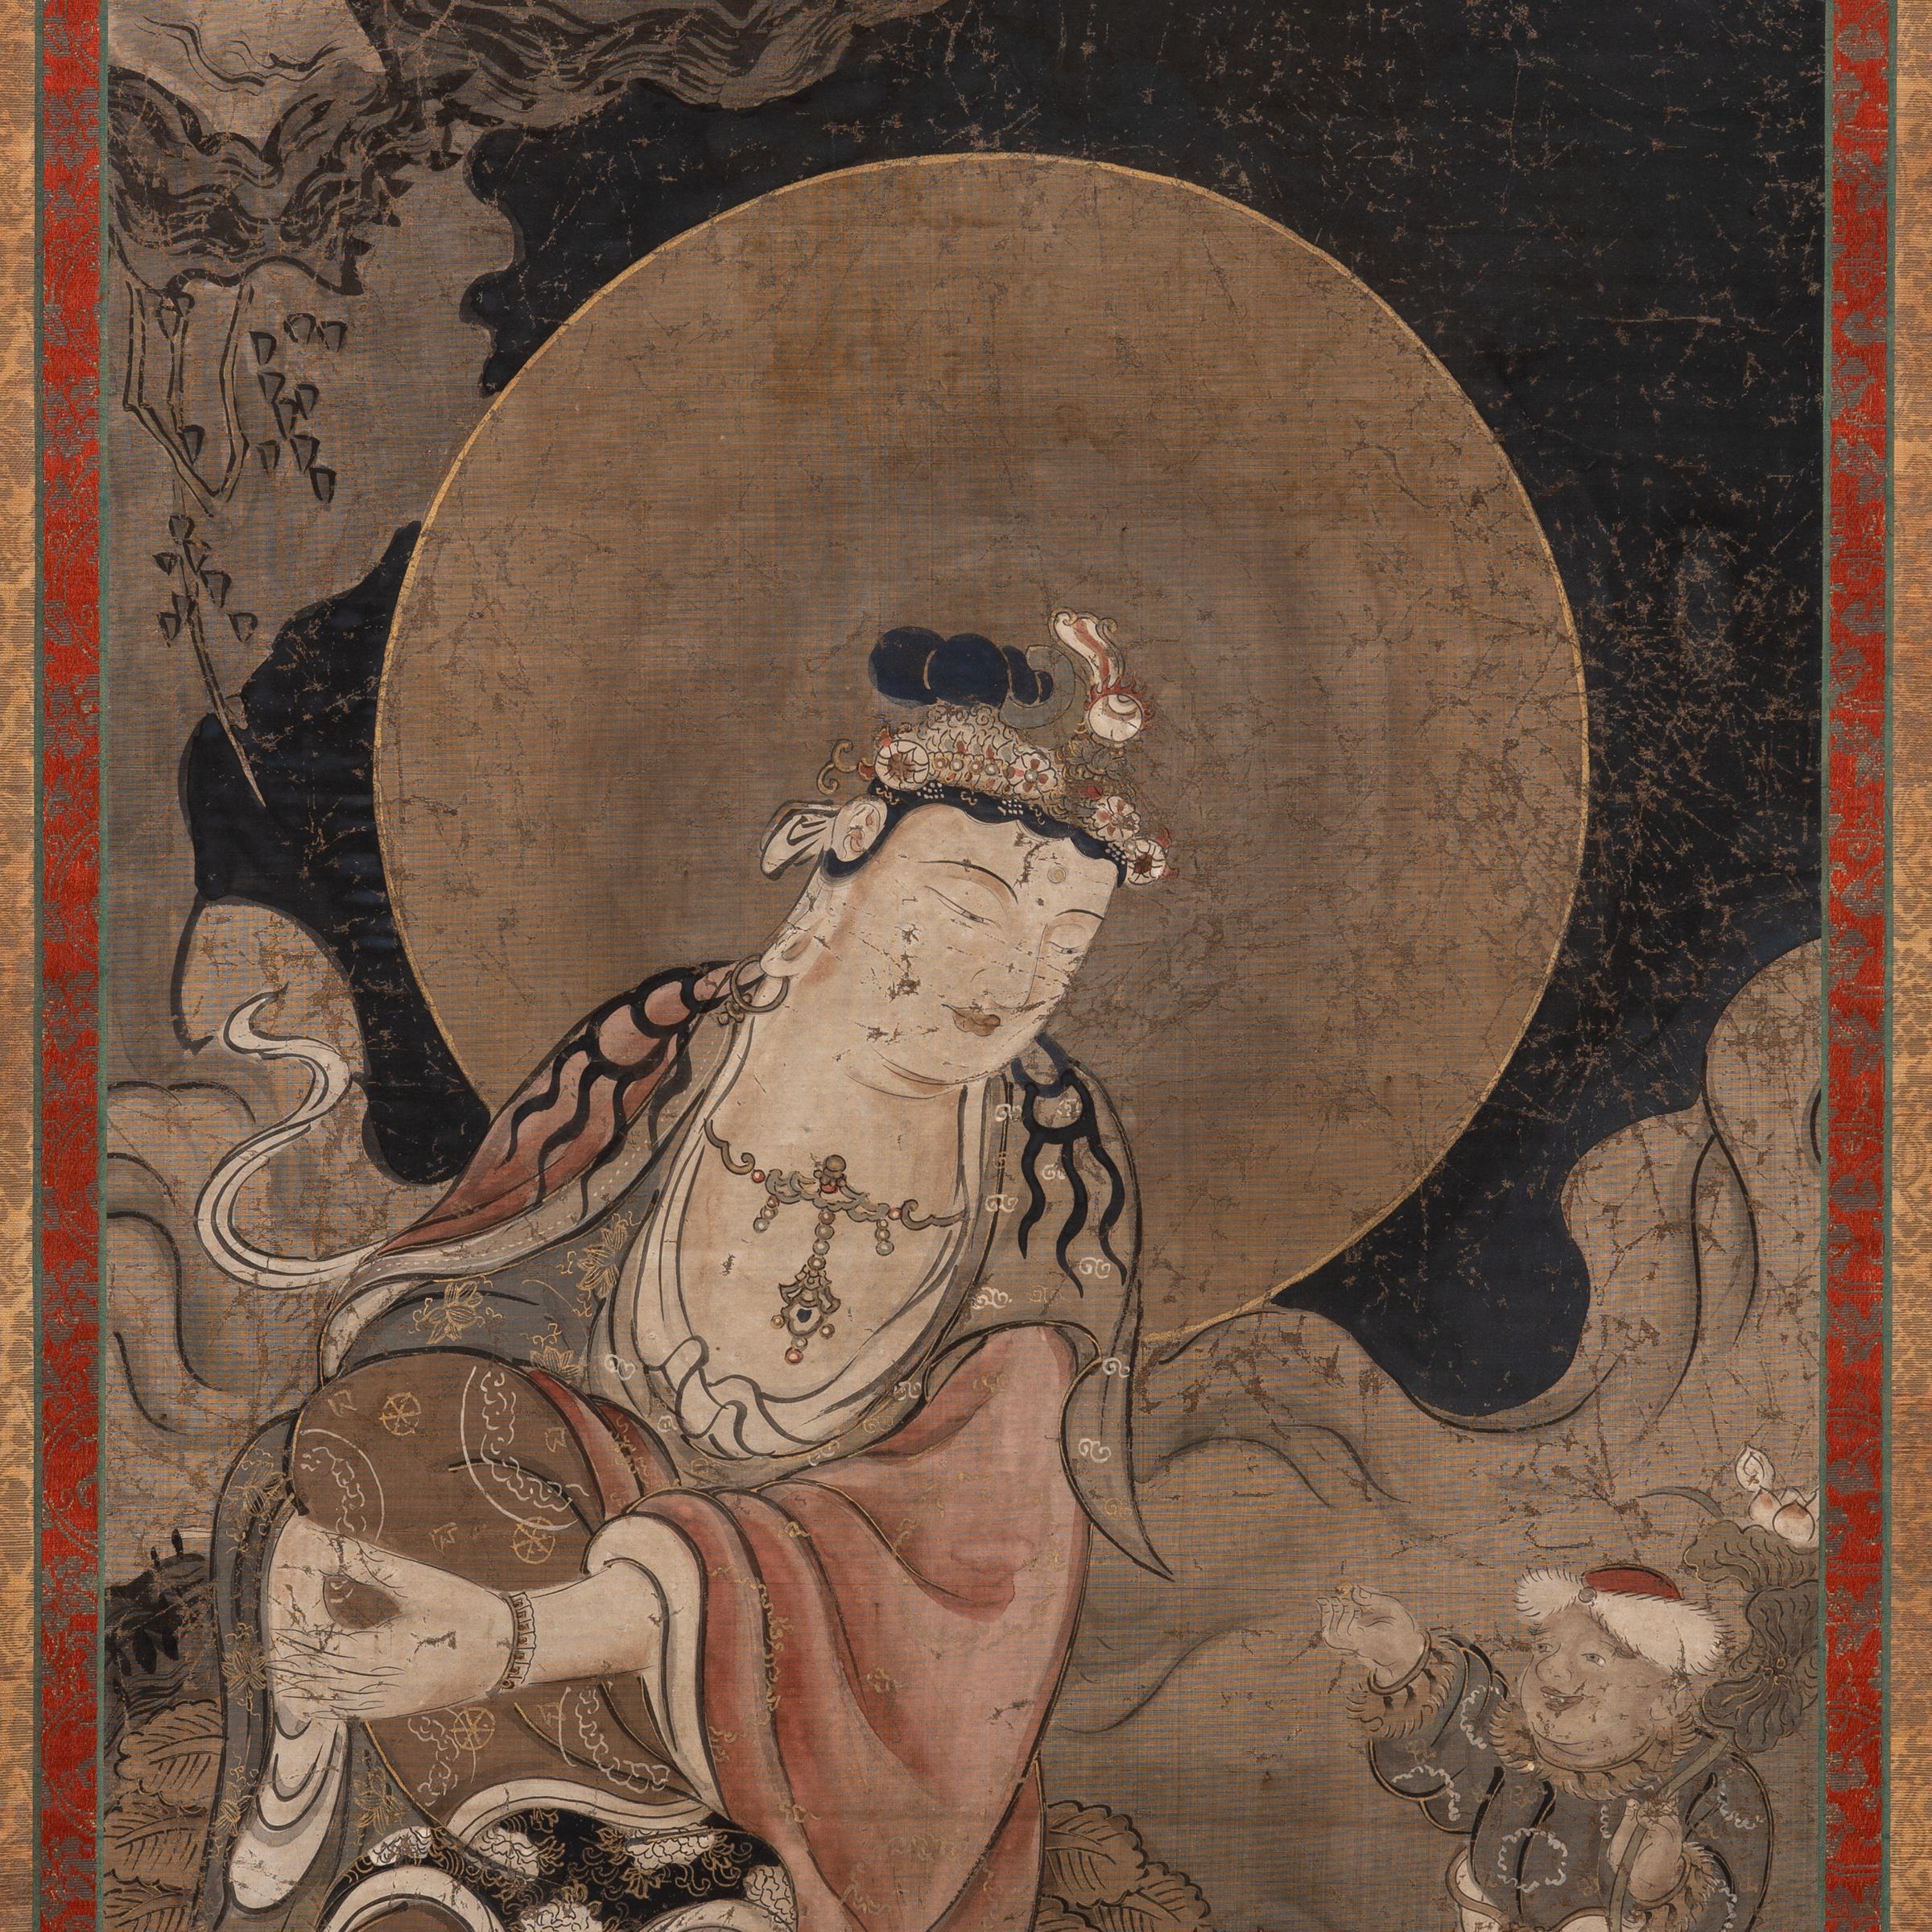 This exquisite hanging scroll painting from the late 18th century depicts the sacred form of the bodhisattva Guanyin, known in Japanese Buddhism as Shō Kannon, or Guze Kannon. Described as the 